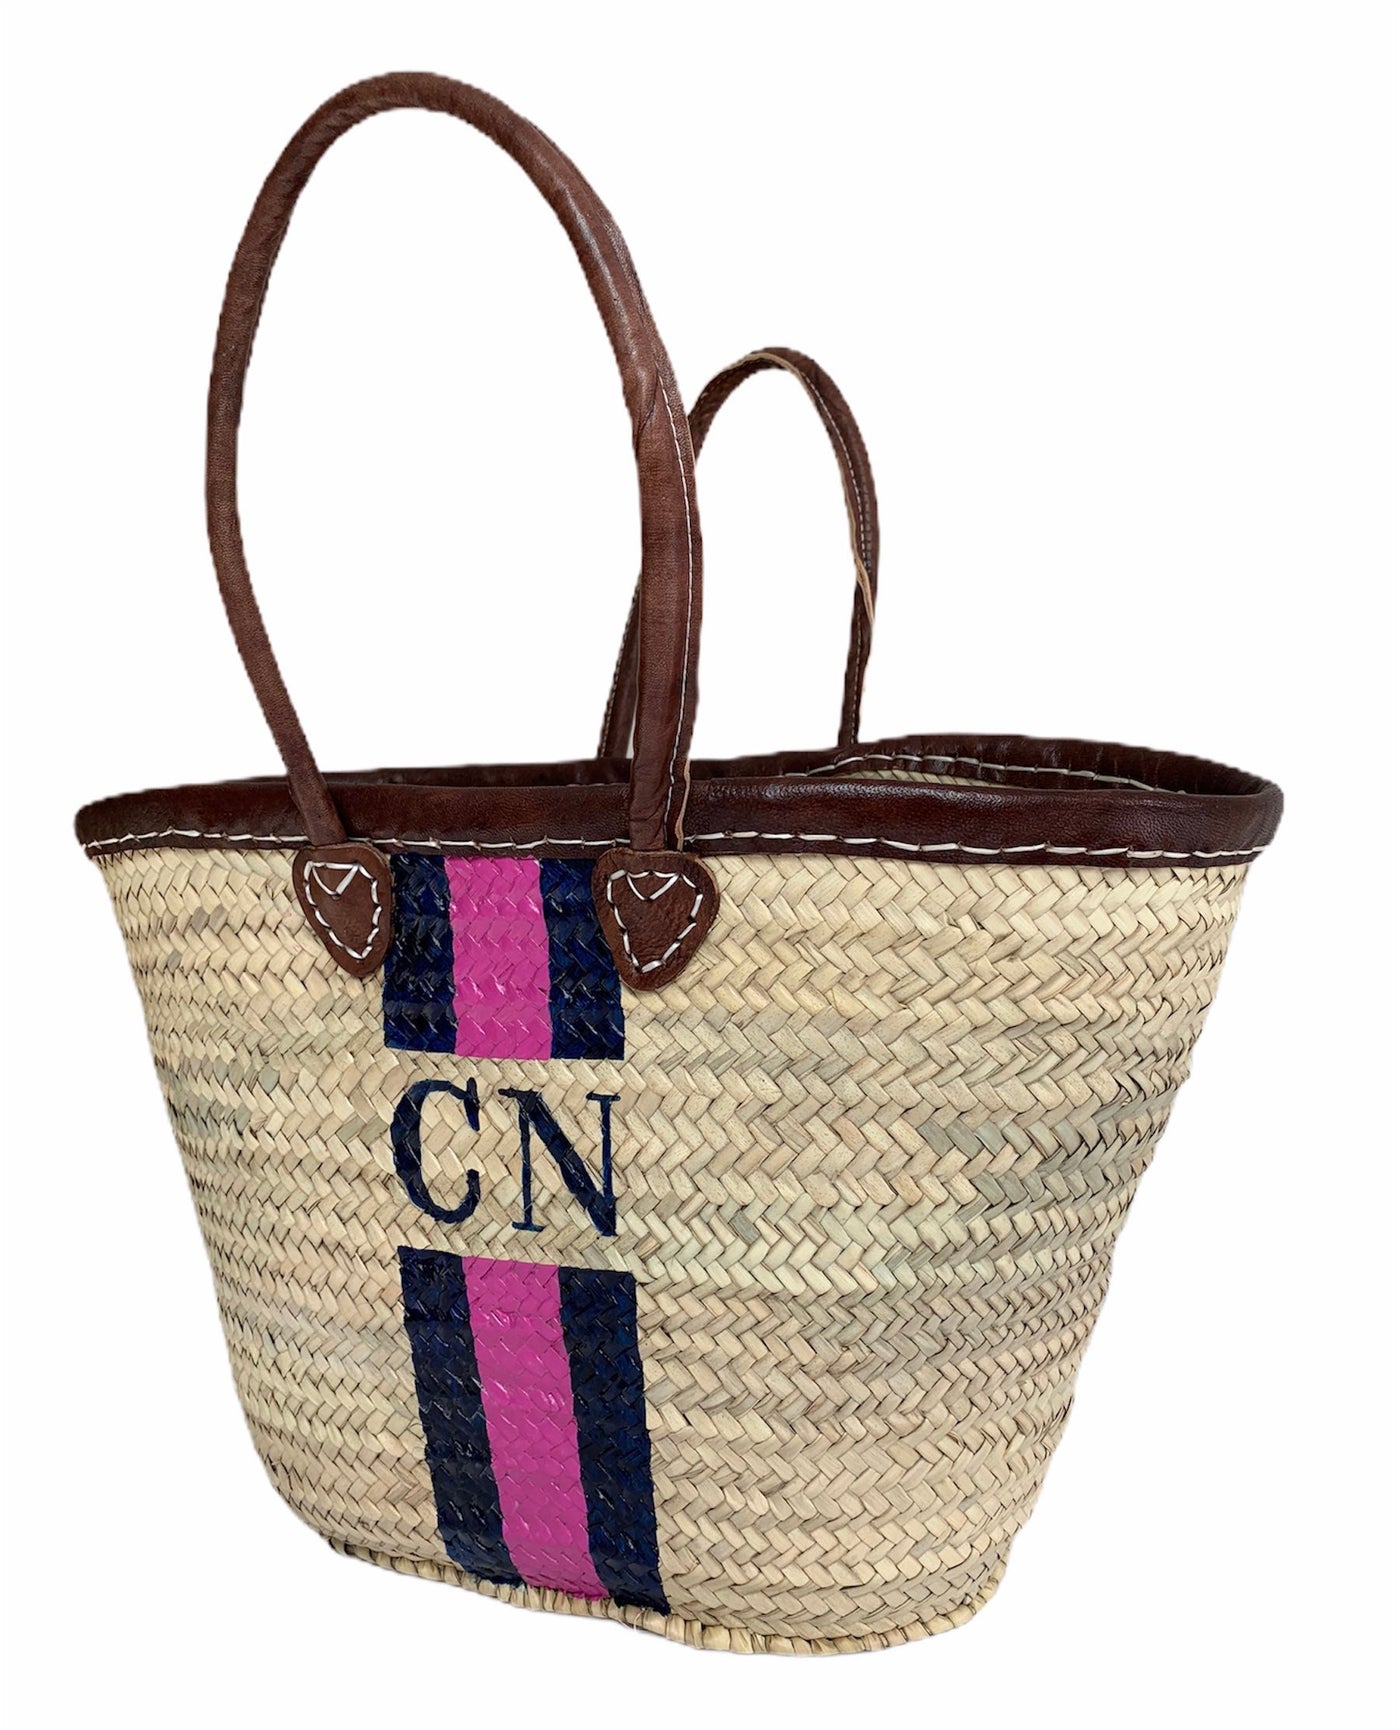 CANNES Monogrammed Straw Basket with Dark Leather Handles - Pink Waters 